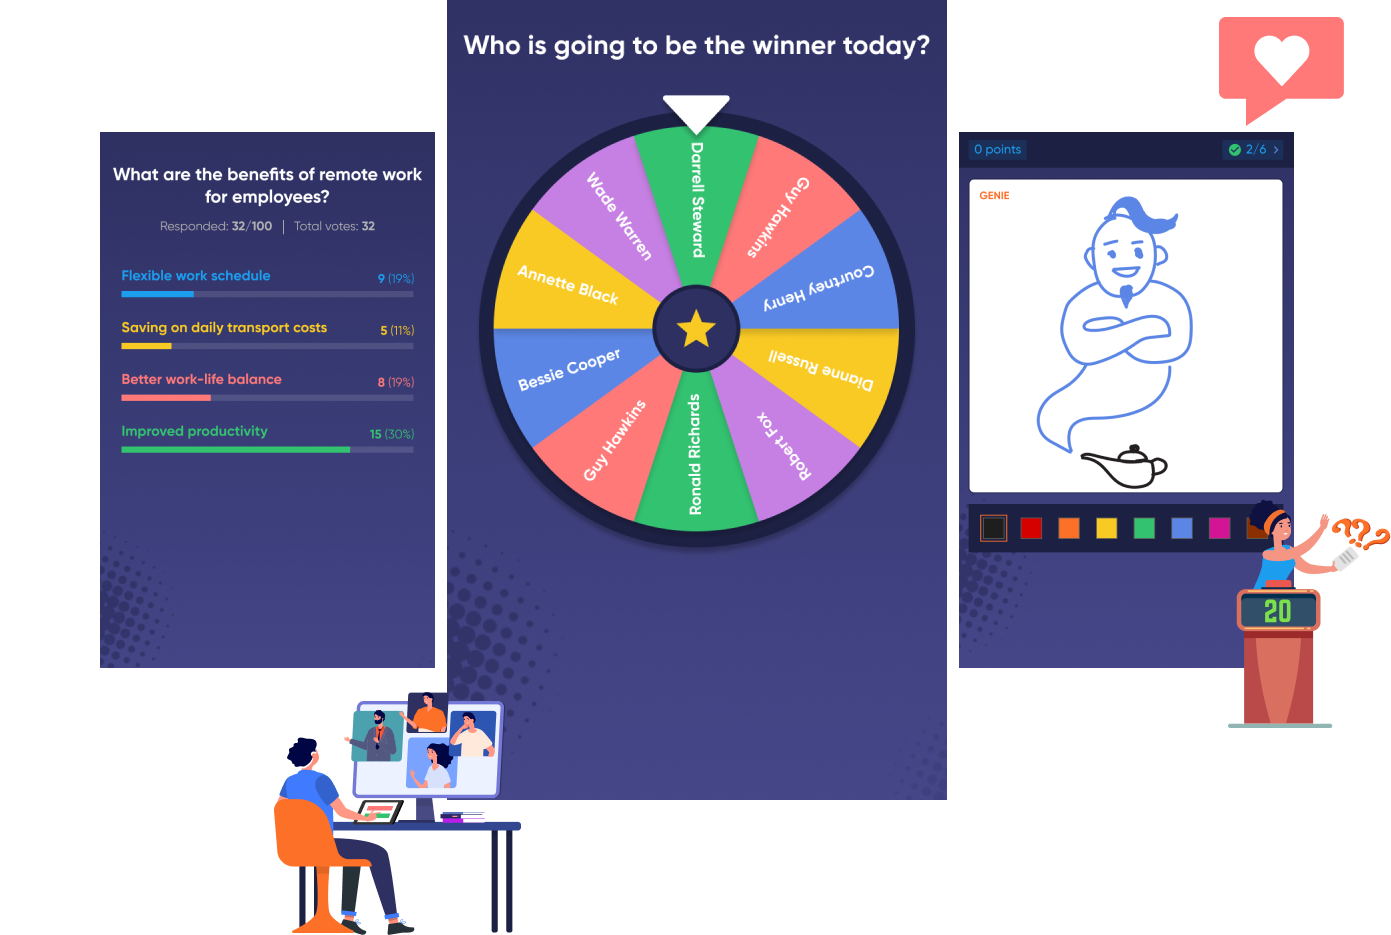 Icebreaker App Helps You Host Fun Virtual Conversation Games and